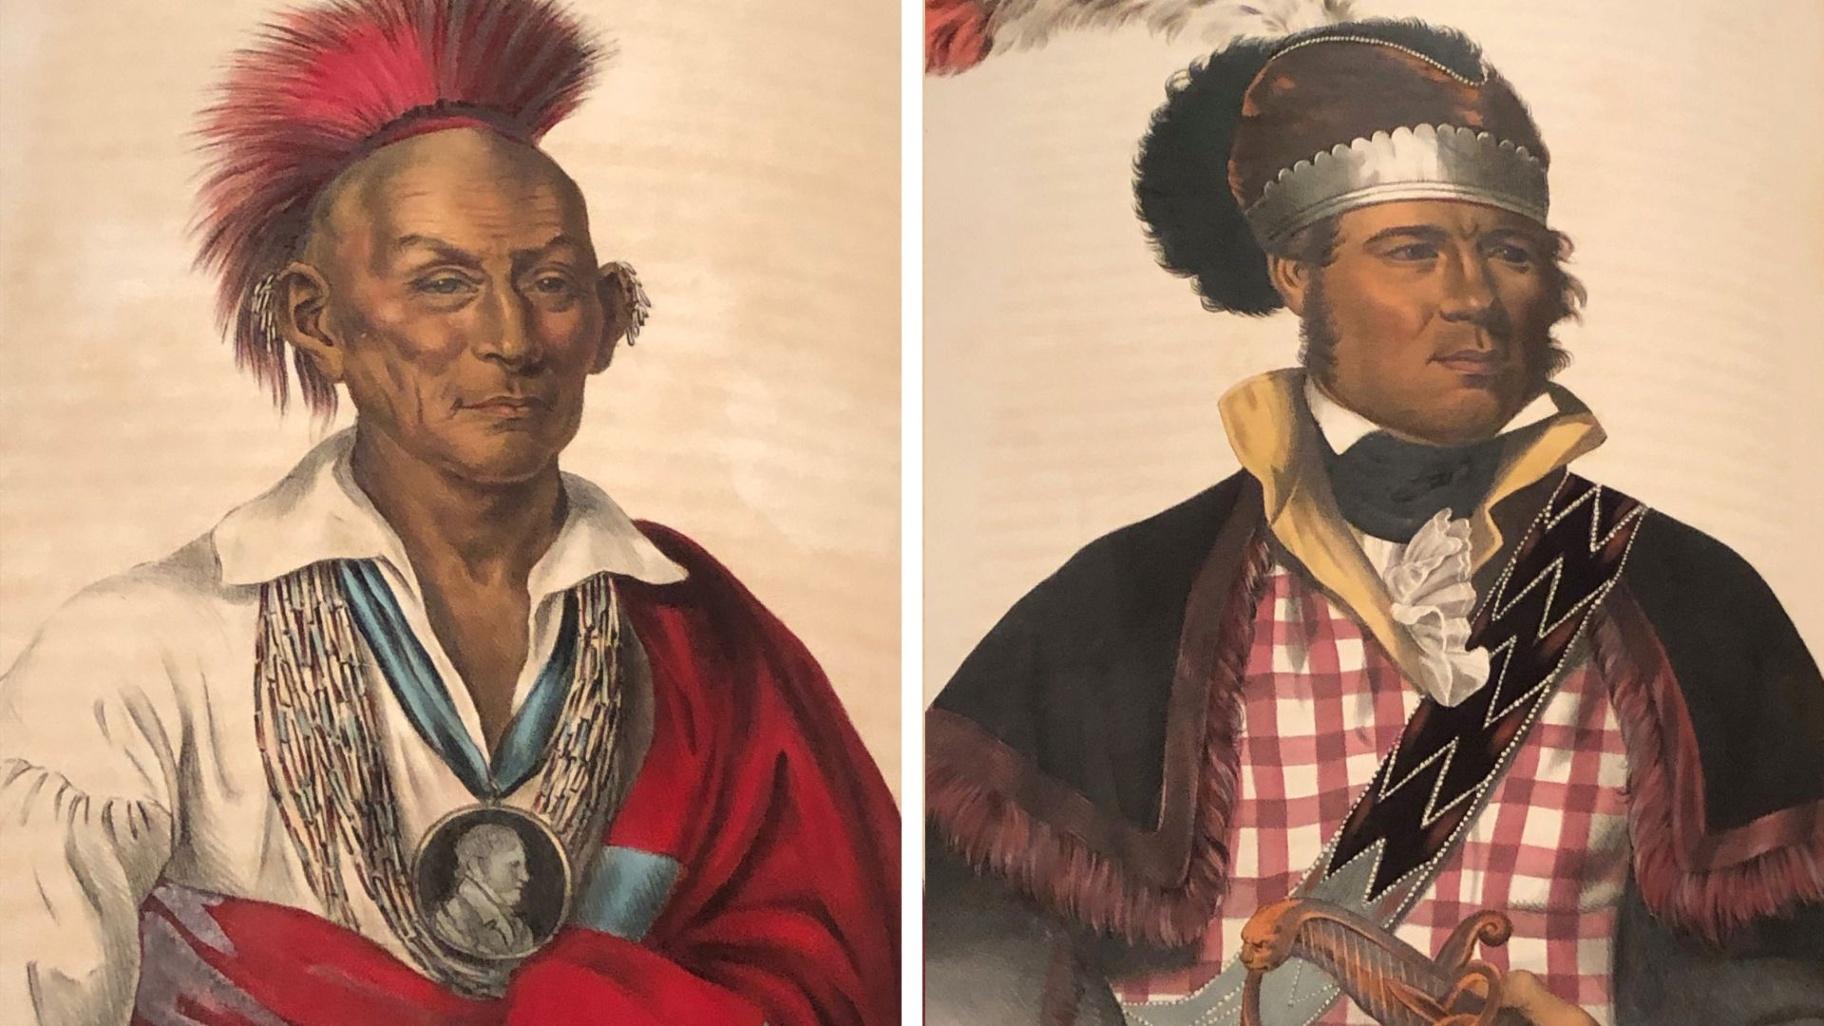 Left: Black Hawk (Sauk). Right: M’intosh (Creek). Both images are on display in “Indigenous Portraits Unbound” at the Newberry Library. (Marc Vitali / WTTW News)